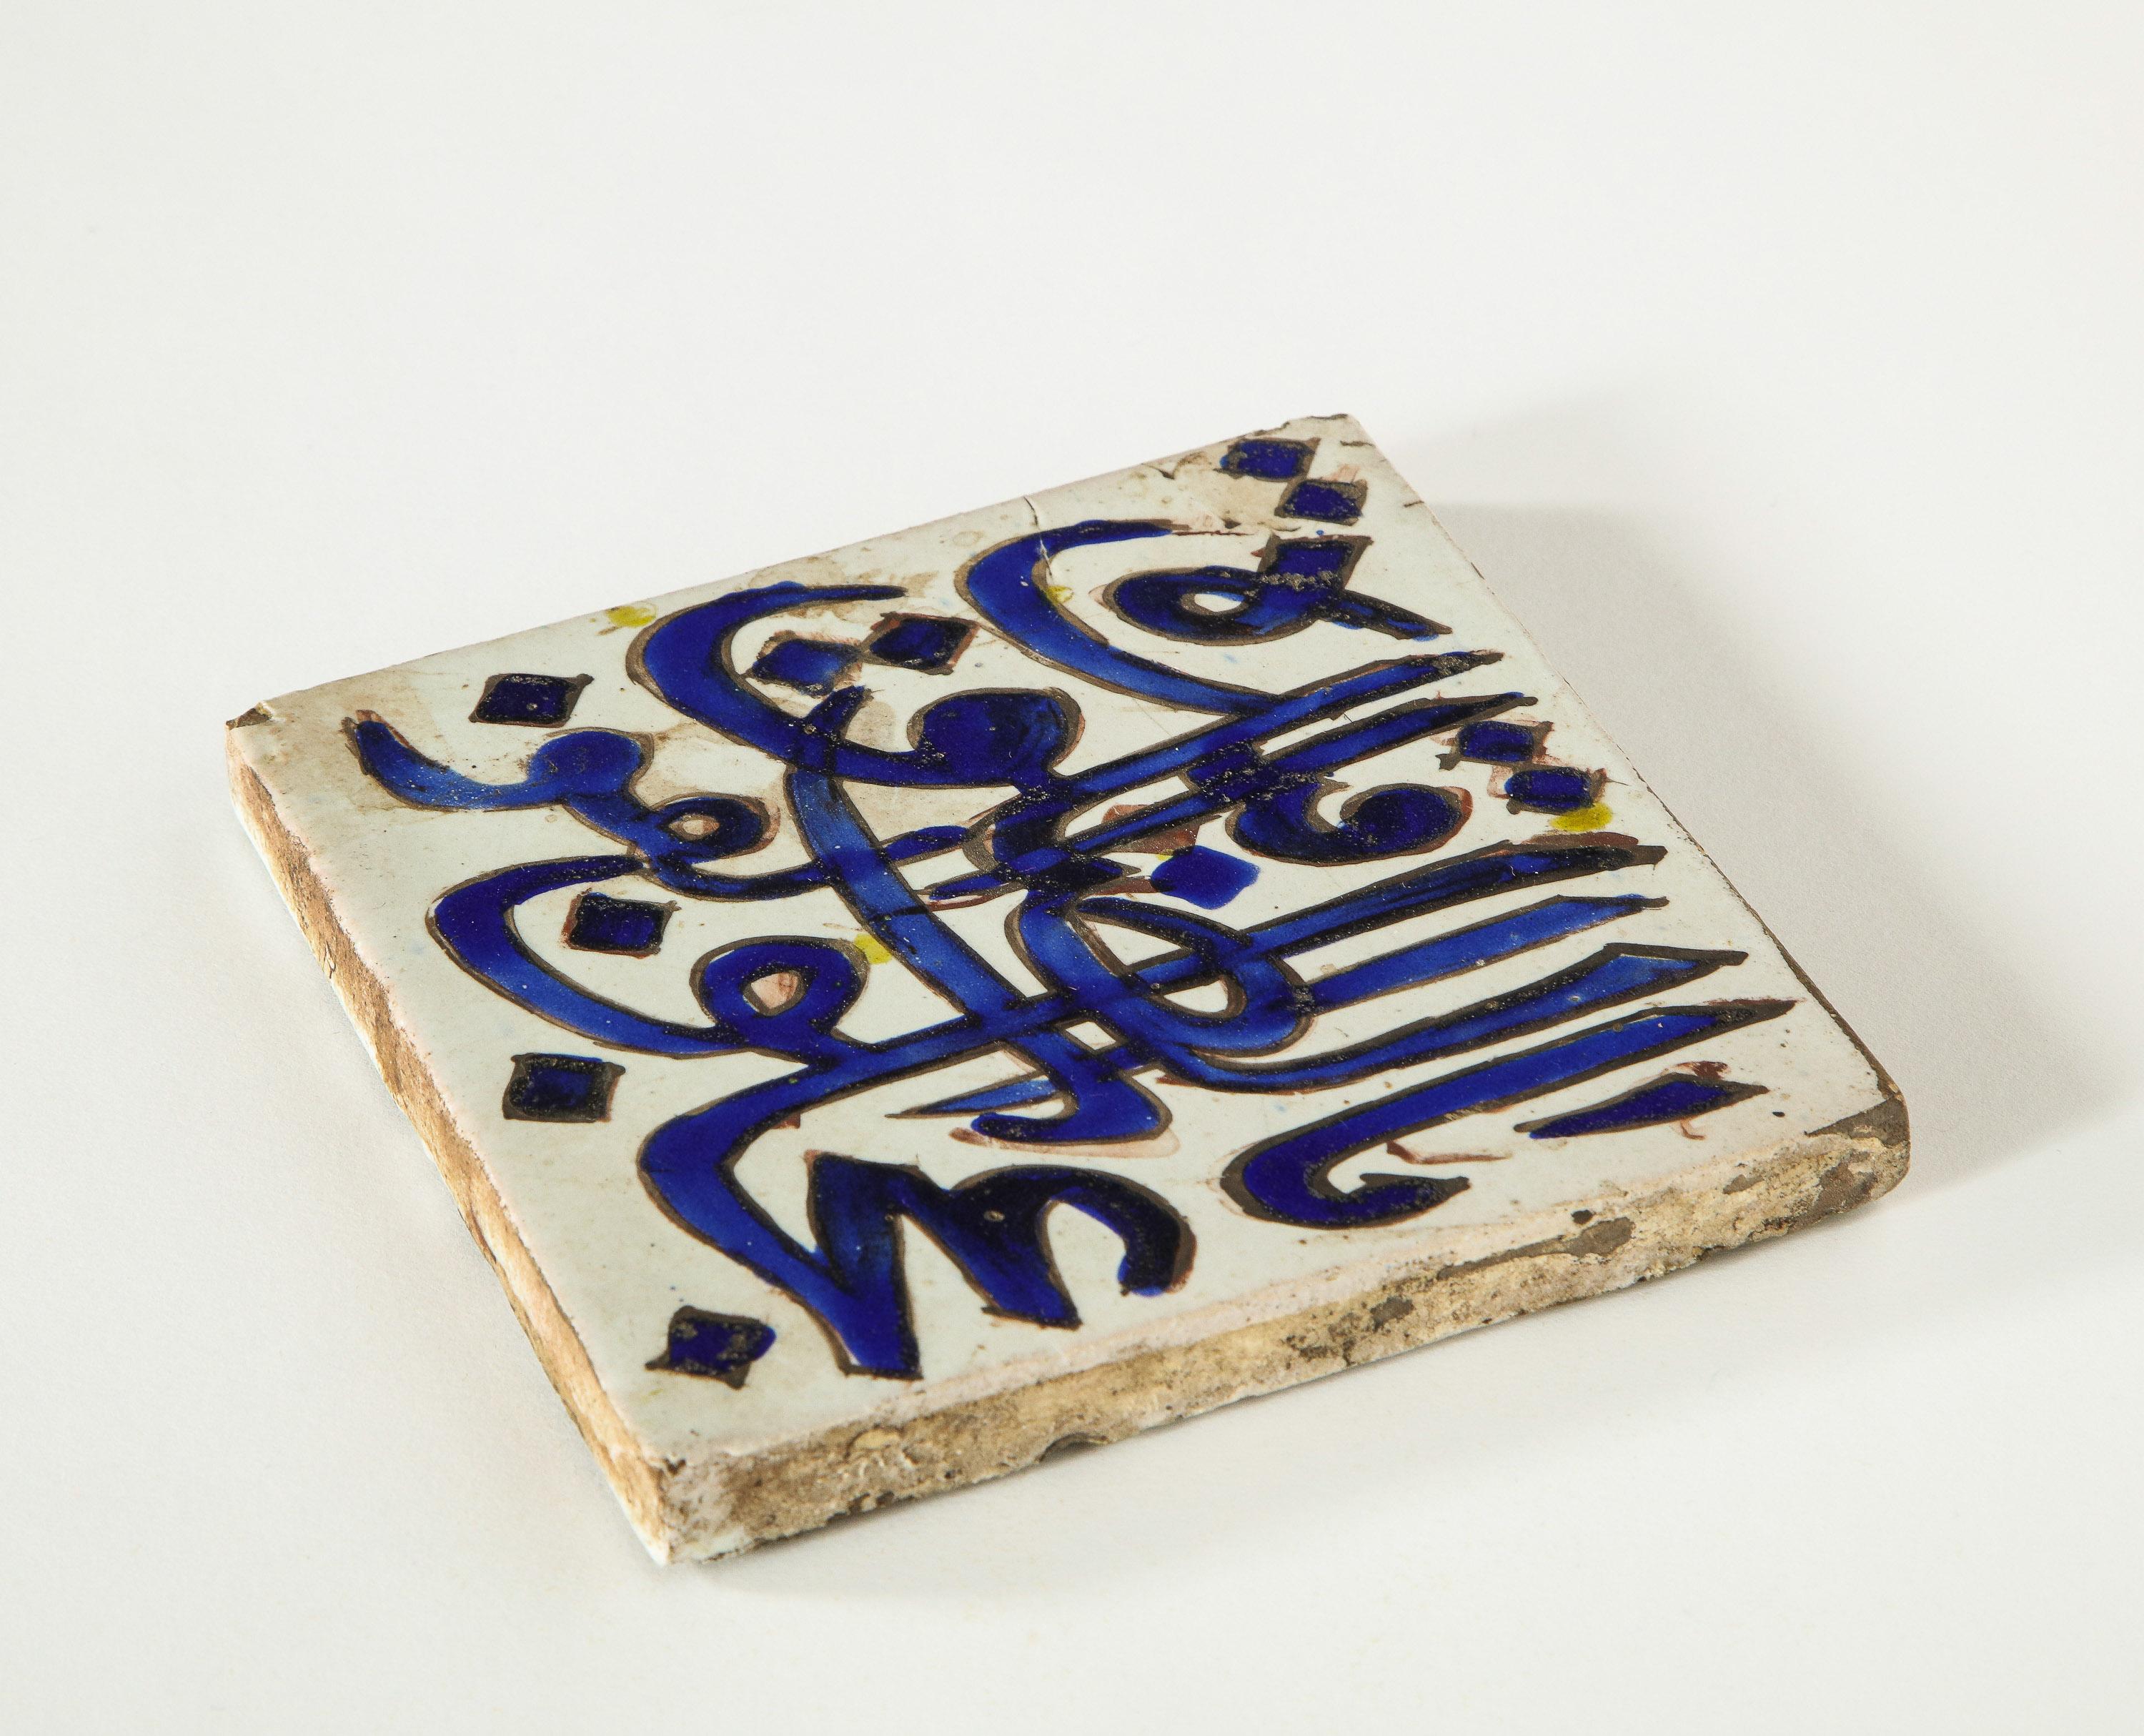 Qajar Dynasty, a Blue and White Islamic Pottery Square Tile, 19th Century 3